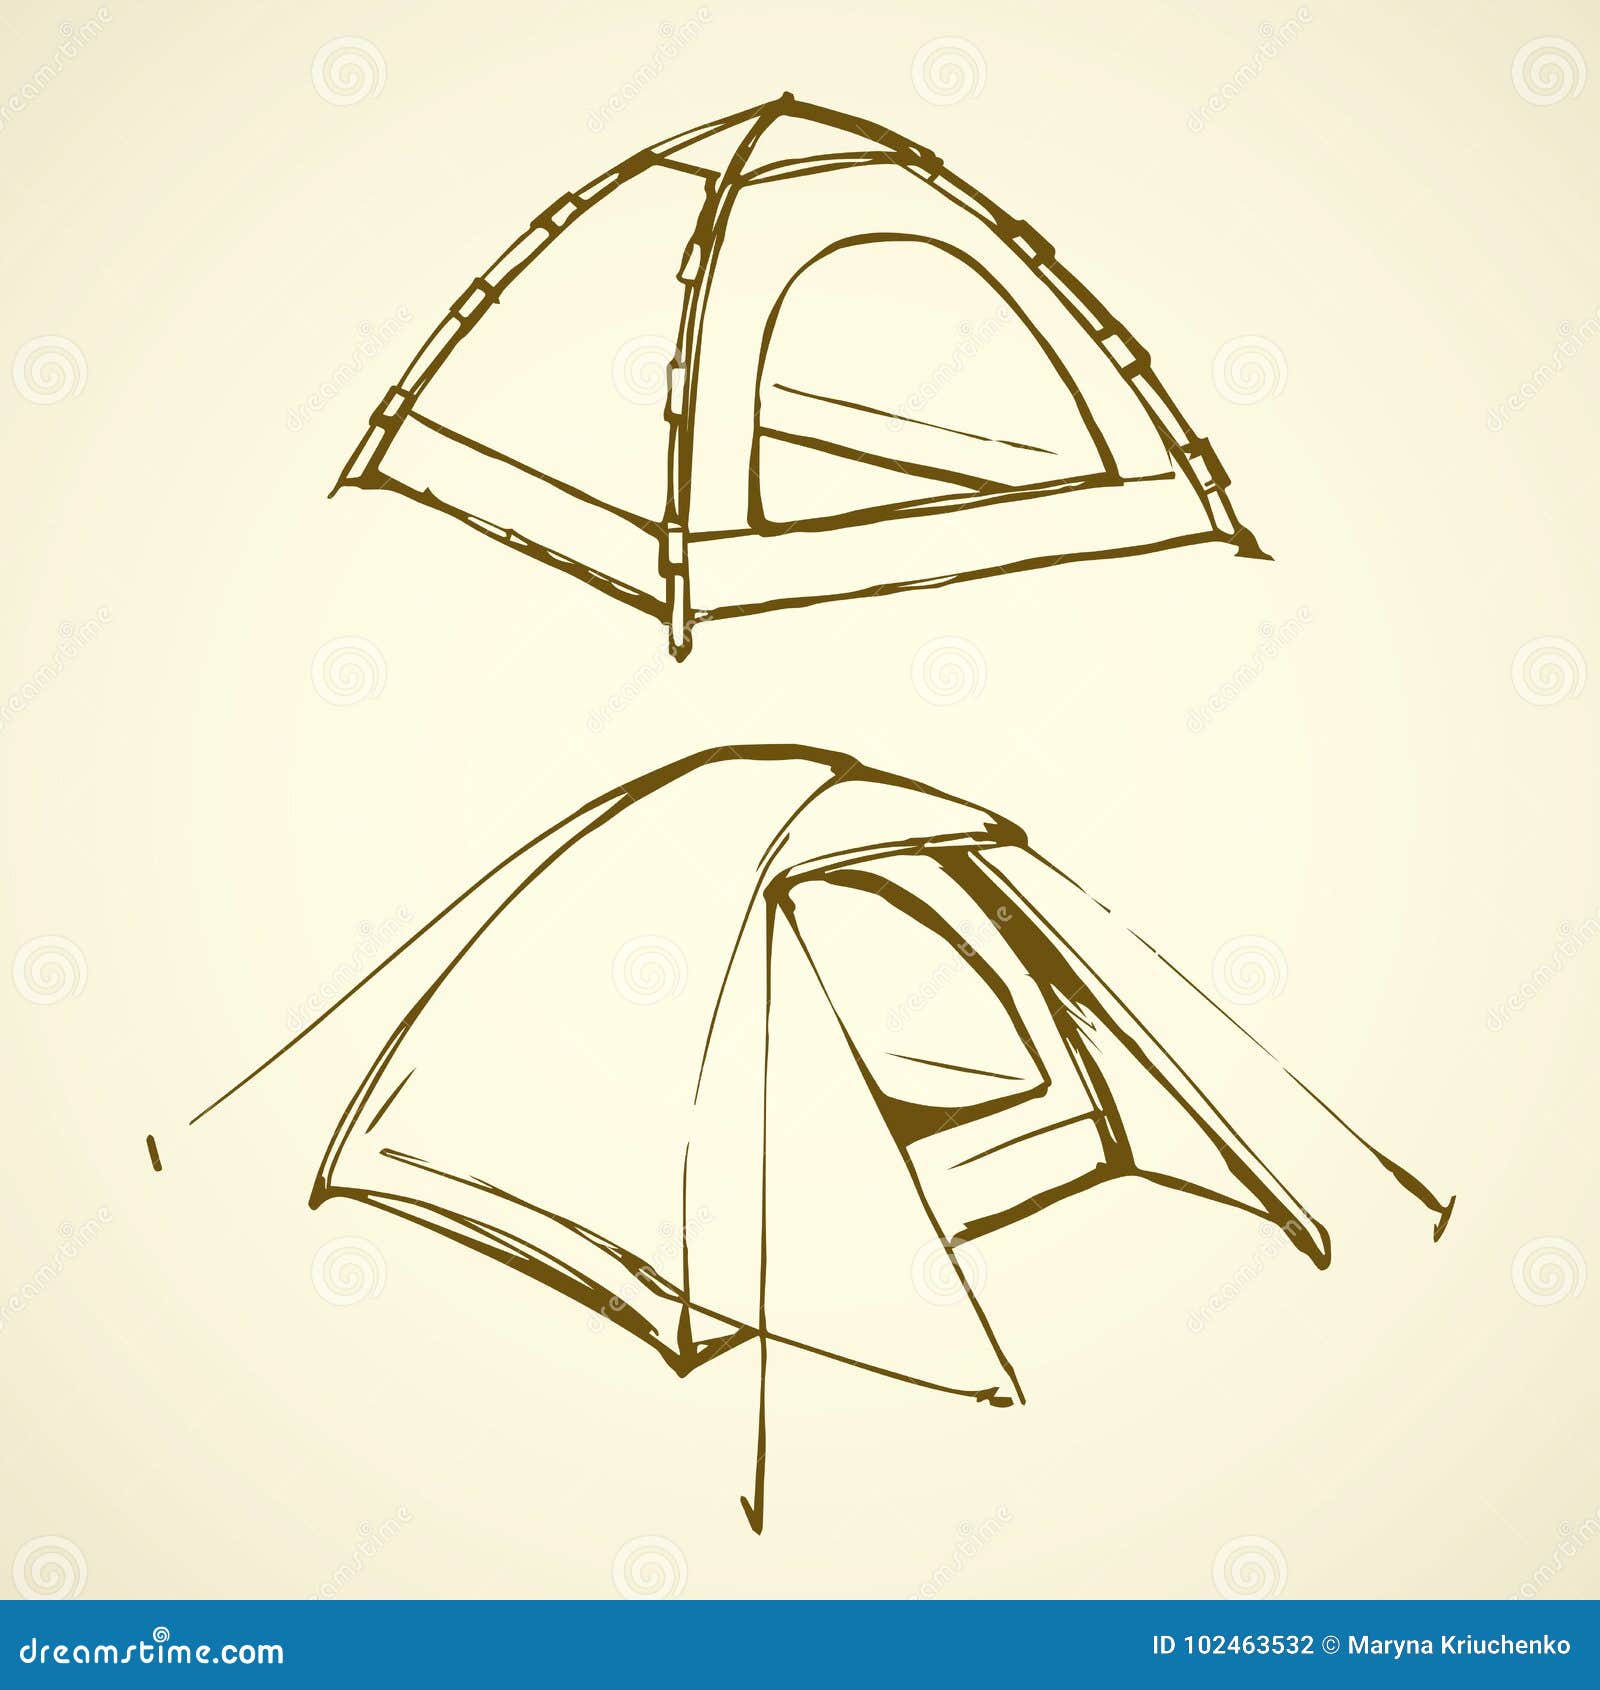 Camping Tent For Tourism, Cartoon Sketch Illustration Of Travel Equipment.  Vector Royalty Free SVG, Cliparts, Vectors, and Stock Illustration. Image  95744783.